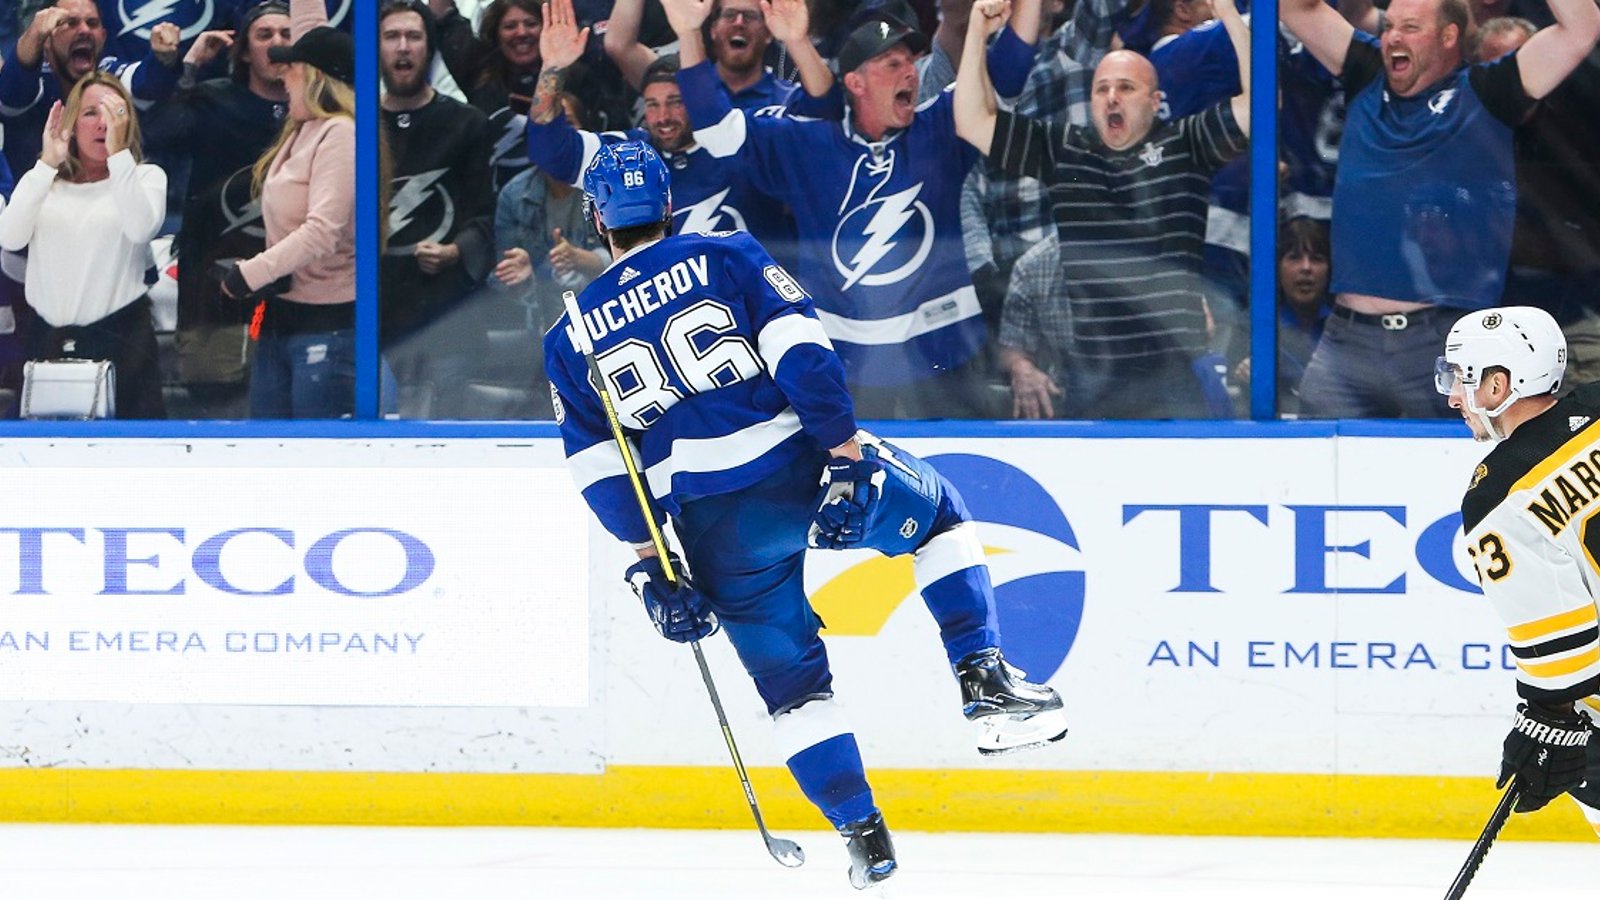 Nikita Kucherov sets an NHL record off the back of another amazing performance.